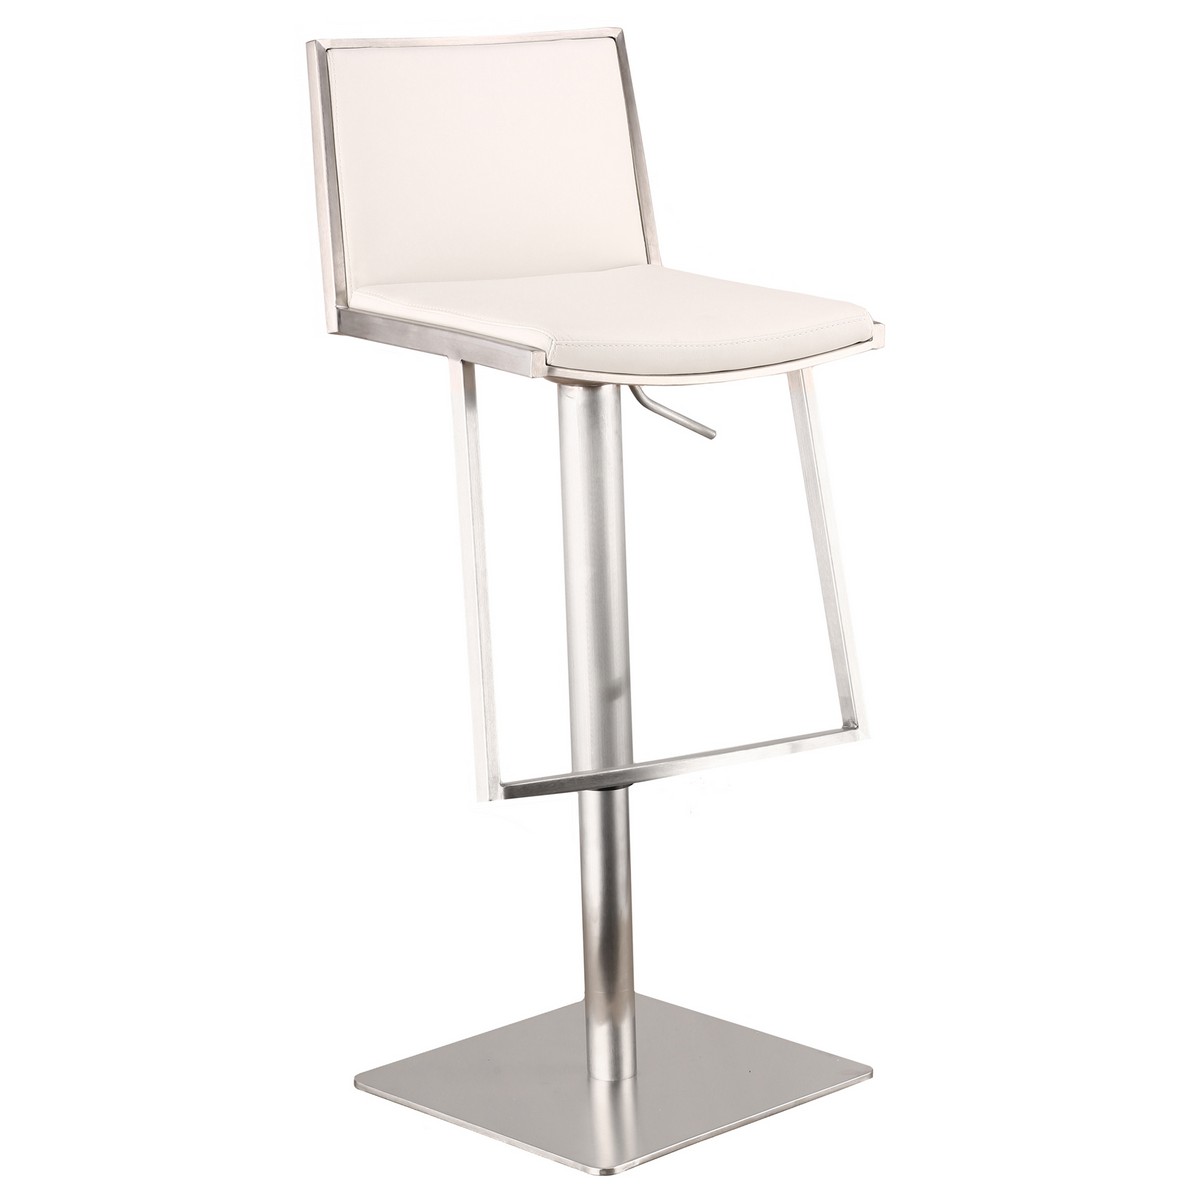 Armen Living Ibiza Adjustable Brushed Stainless Steel Barstool in White Leatherette